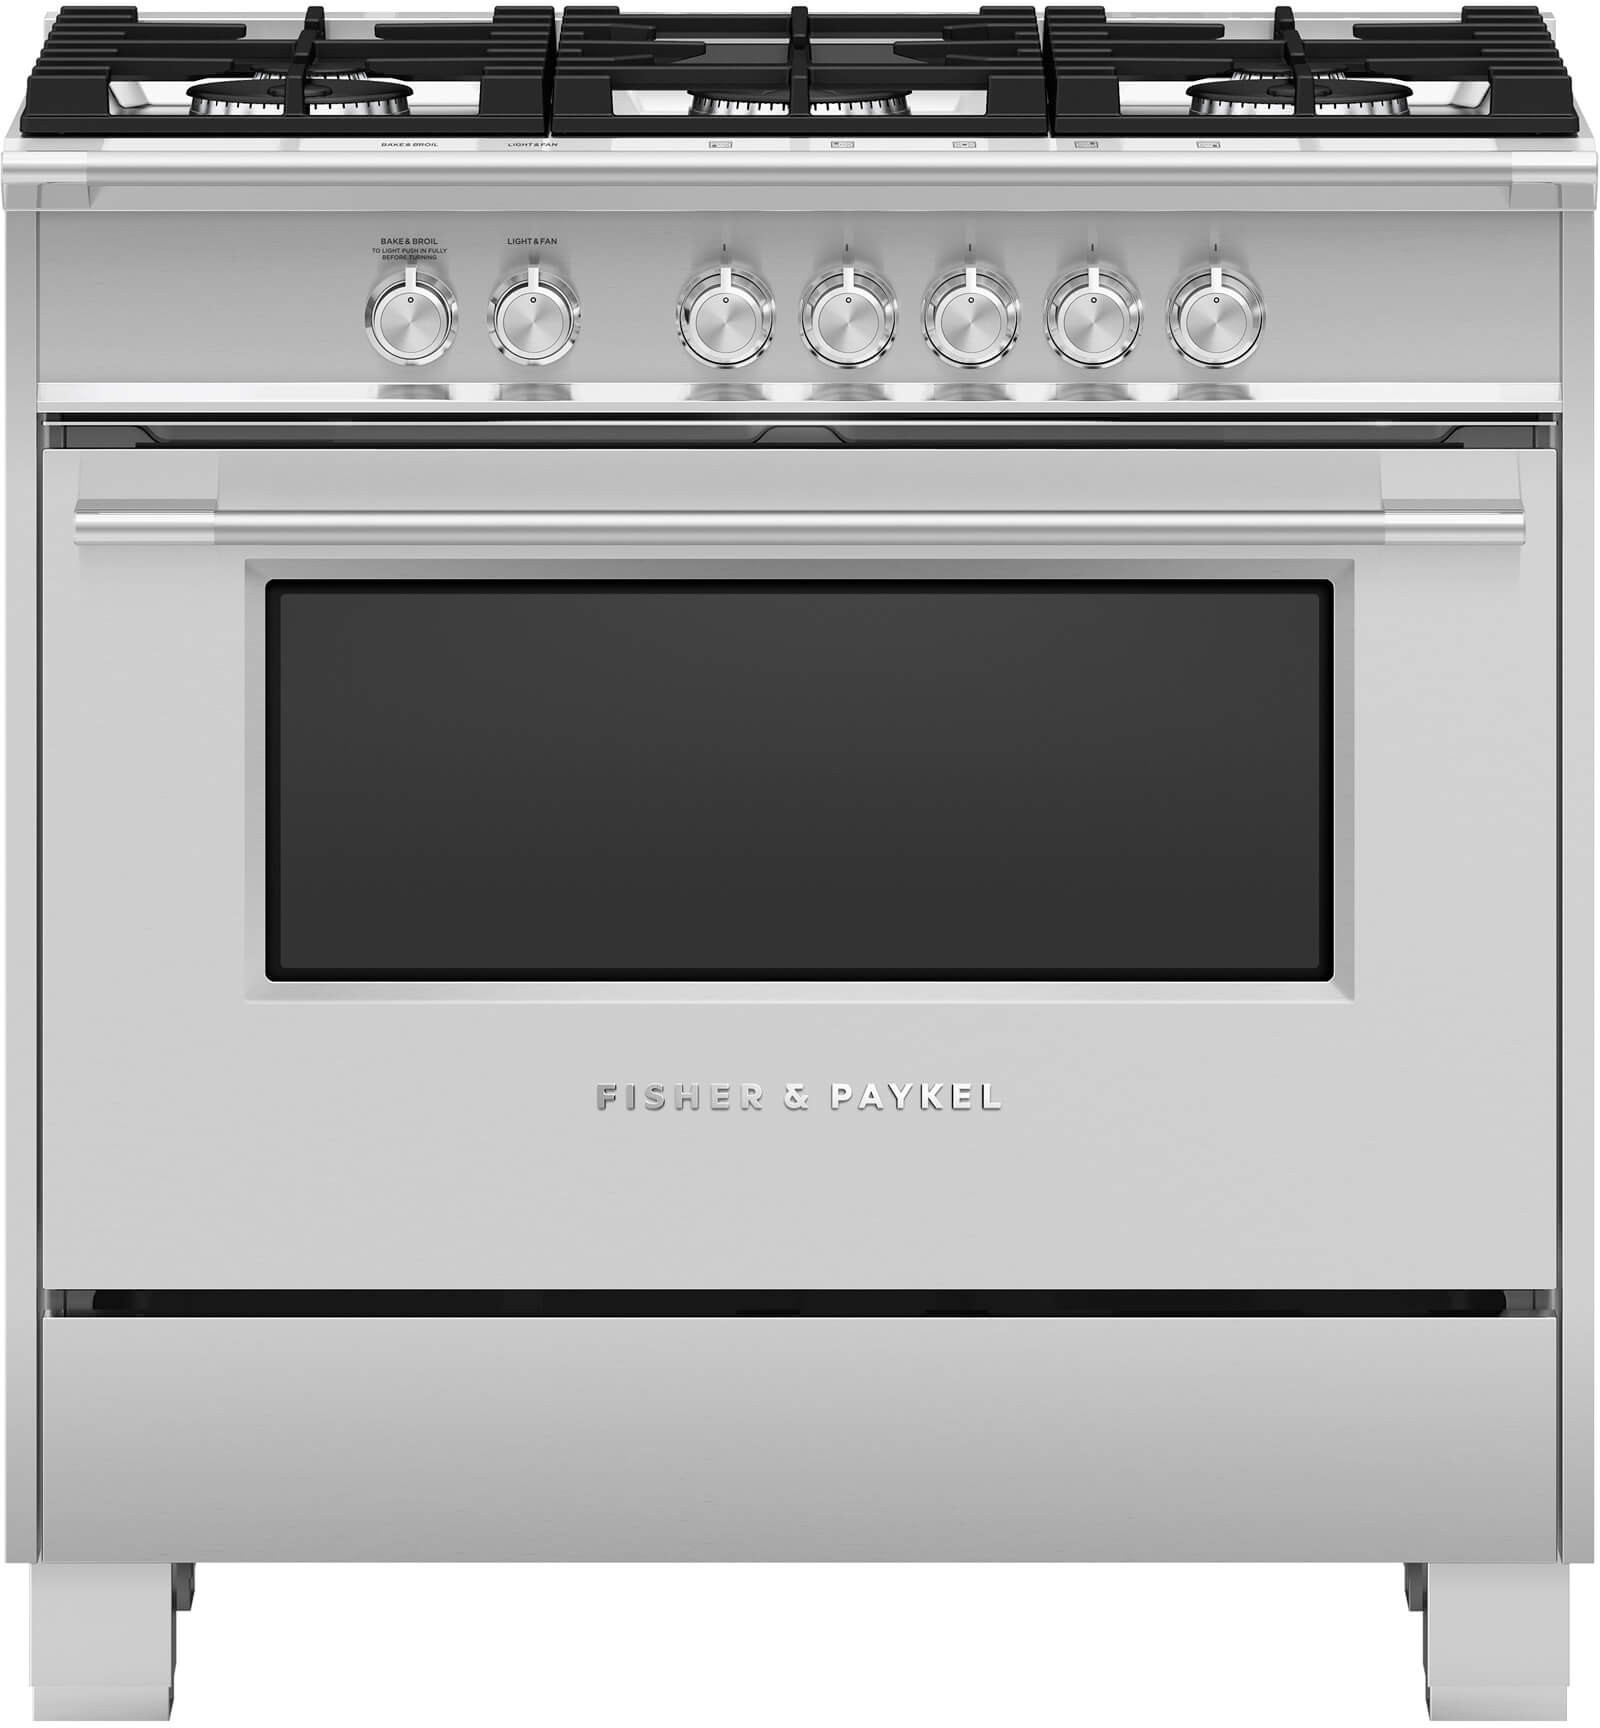 Fisher & Paykel Series 7 classic 36 Freestanding Natural Gas Range OR36SCG4X1